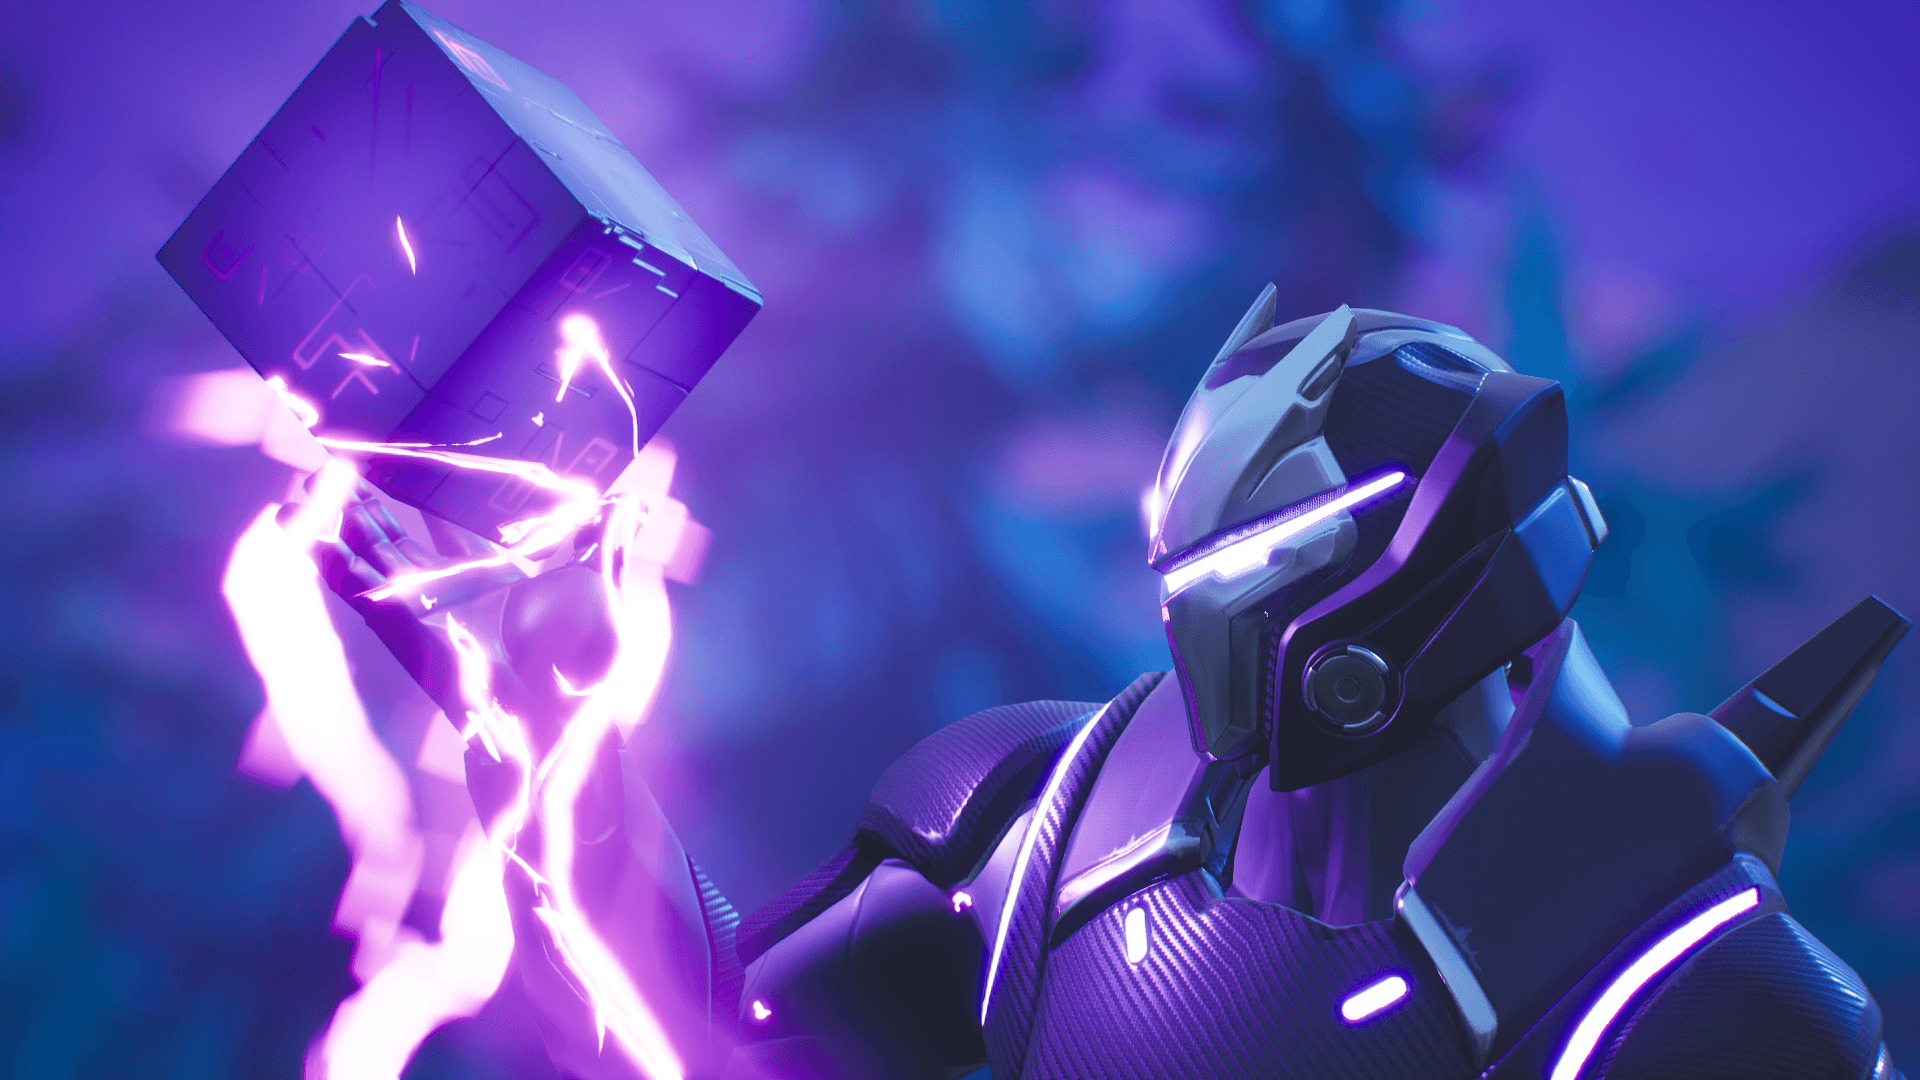 I think purple Omega really blends in with the whole aesthetic